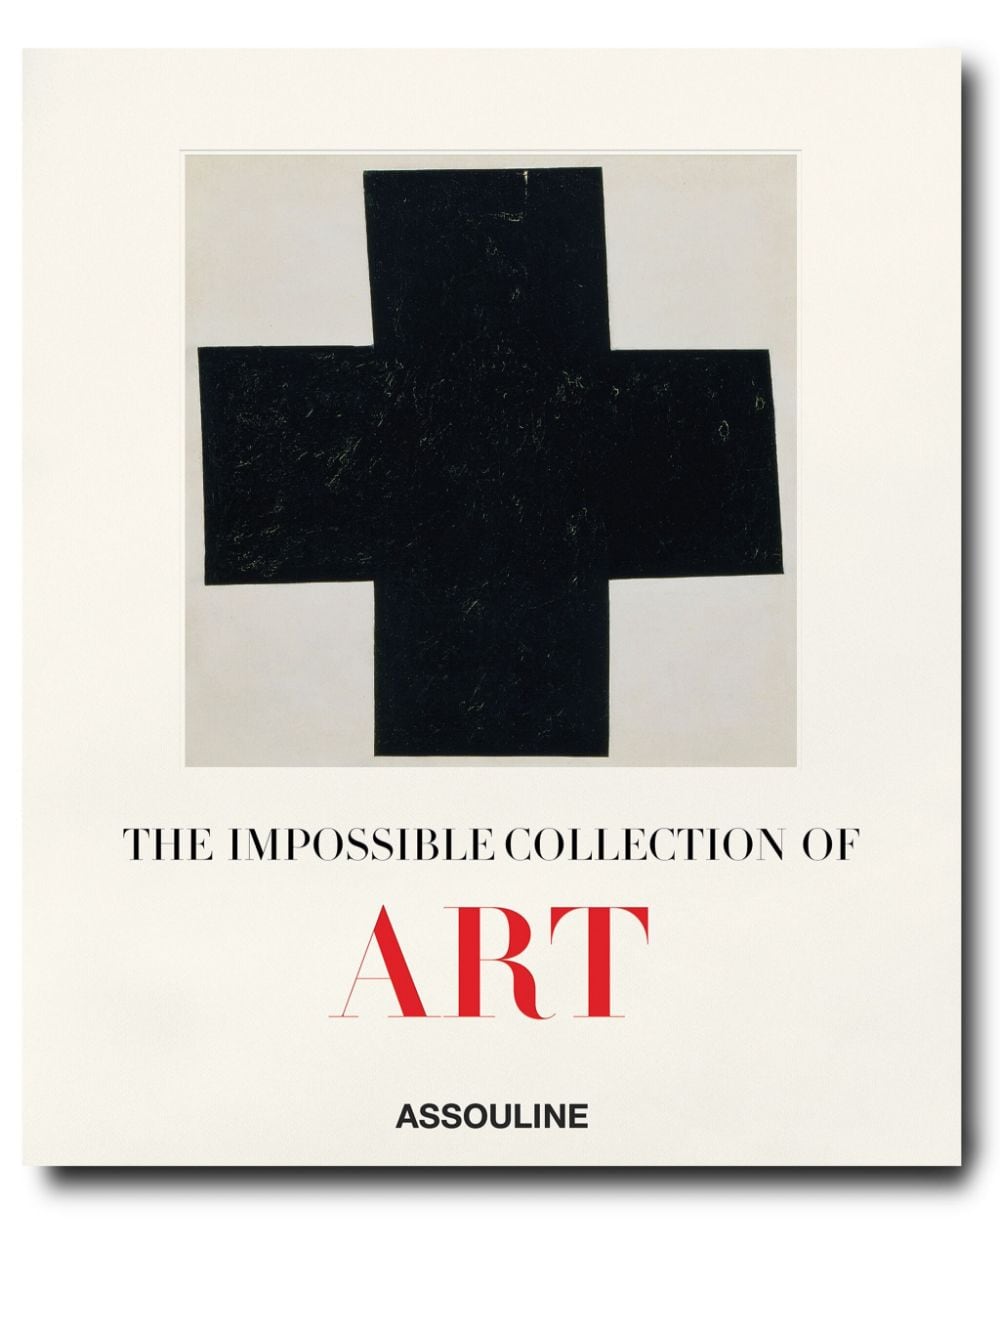 Assouline The Impossible Collection of Art (2nd Edition) book - White von Assouline